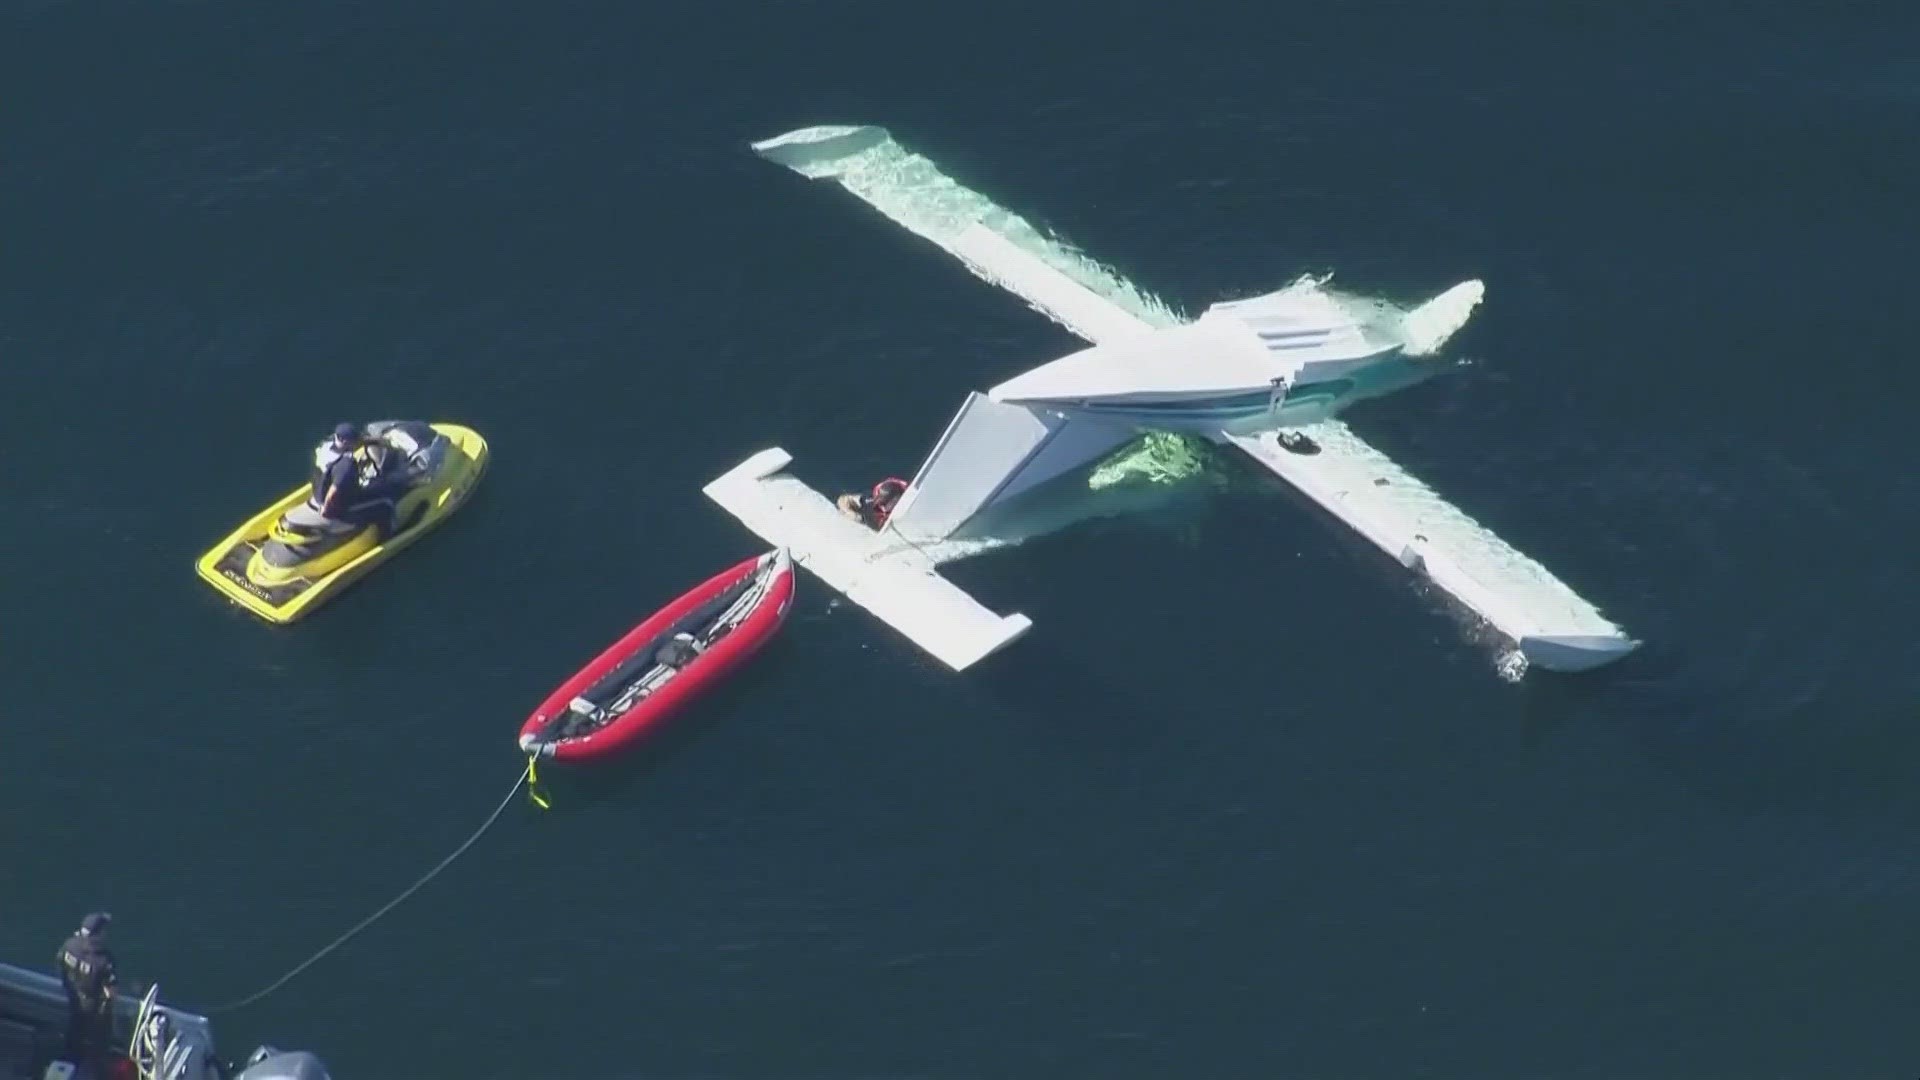 The involved plane is a single-engine Seawind 3000 and had two people on board, according to the Federal Aviation Administration. The pilot died at the scene.